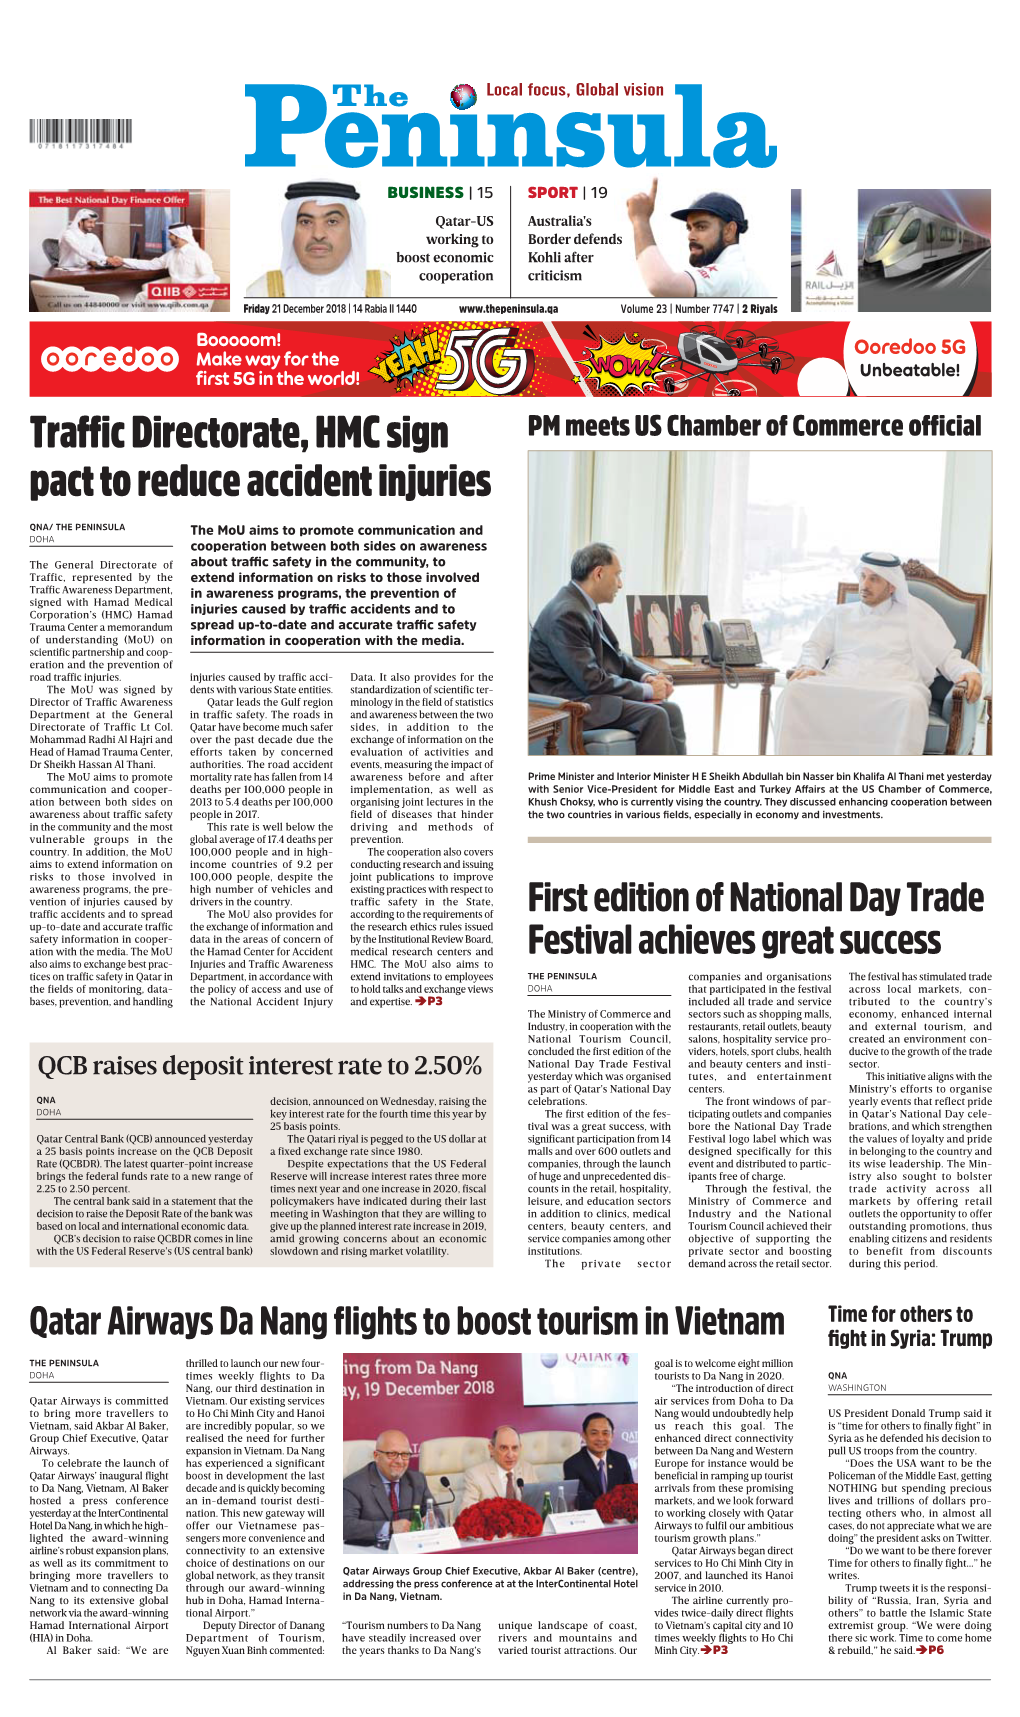 Traffic Directorate, HMC Sign Pact to Reduce Accident Injuries